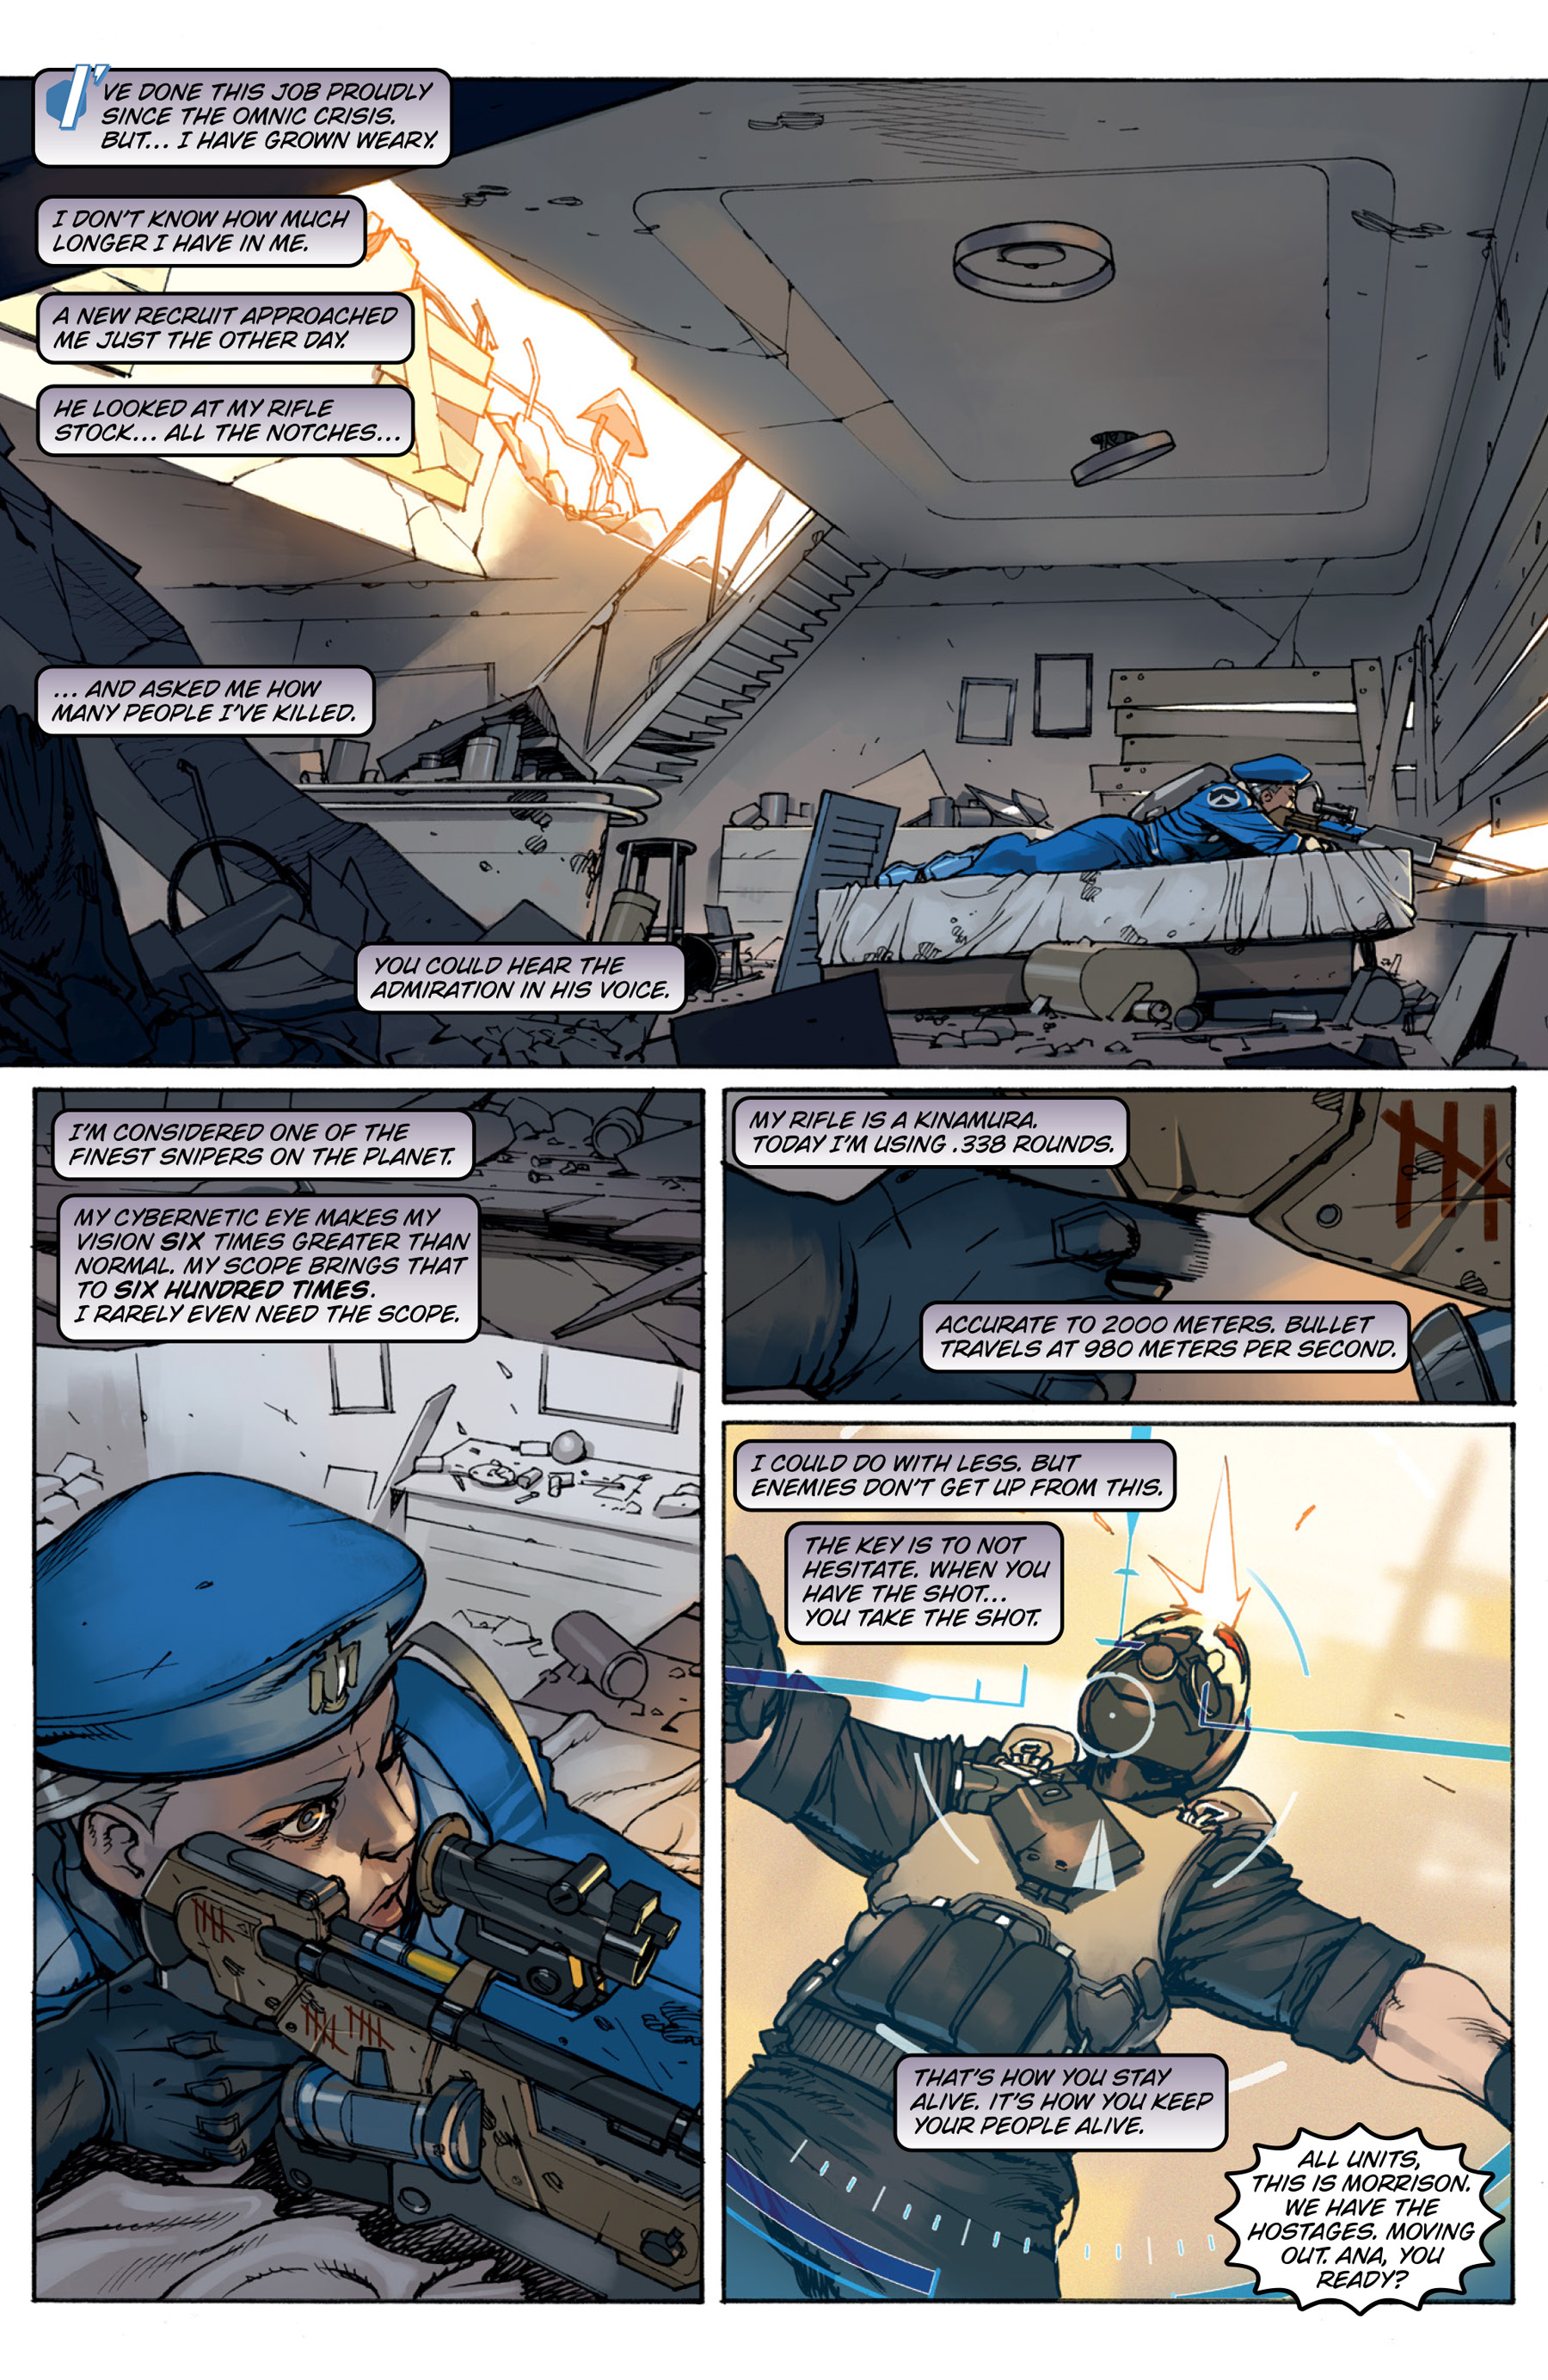 Overwatch (2016-): Chapter 7 - Page 3